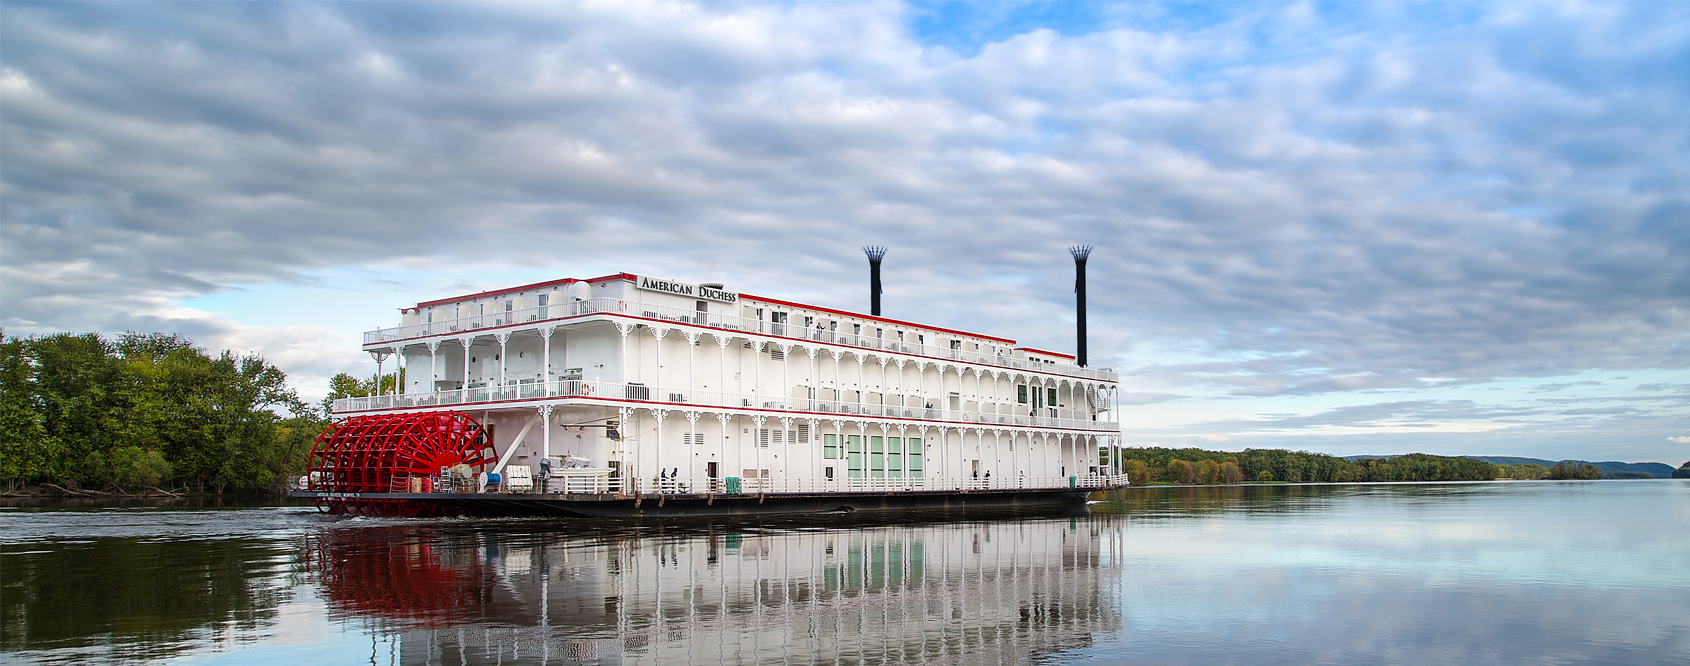 American Queen Voyages Main Image